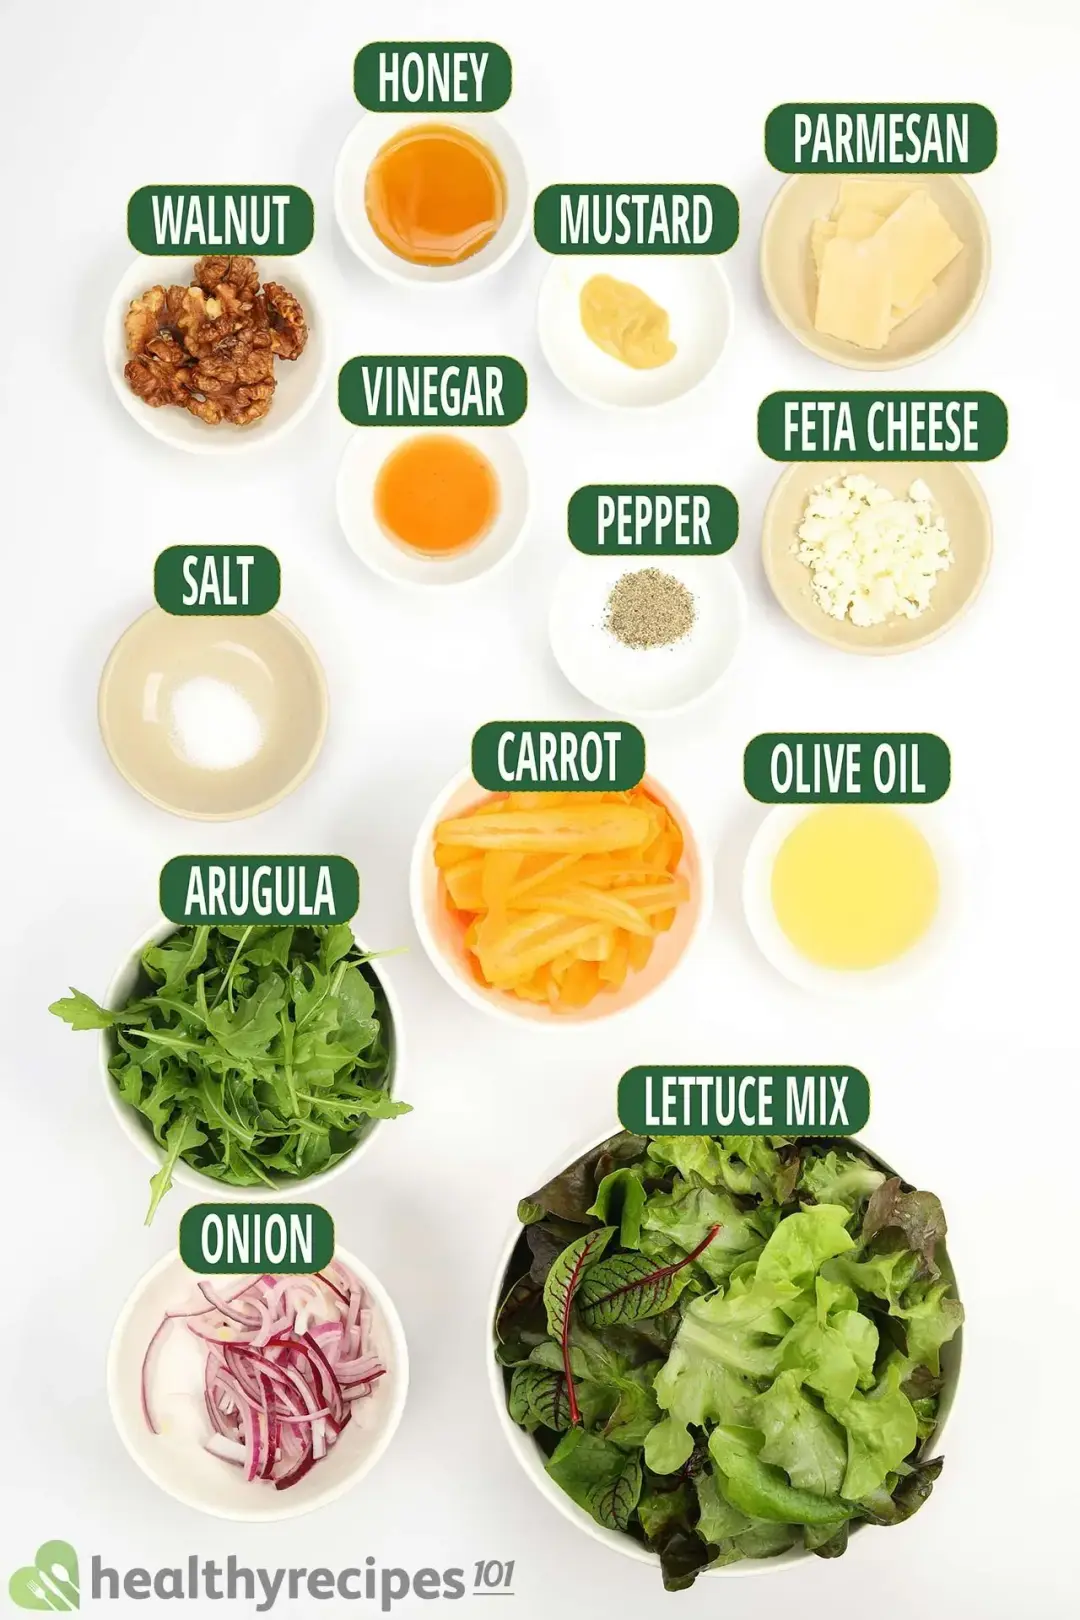 Ingredients for Salad Mix